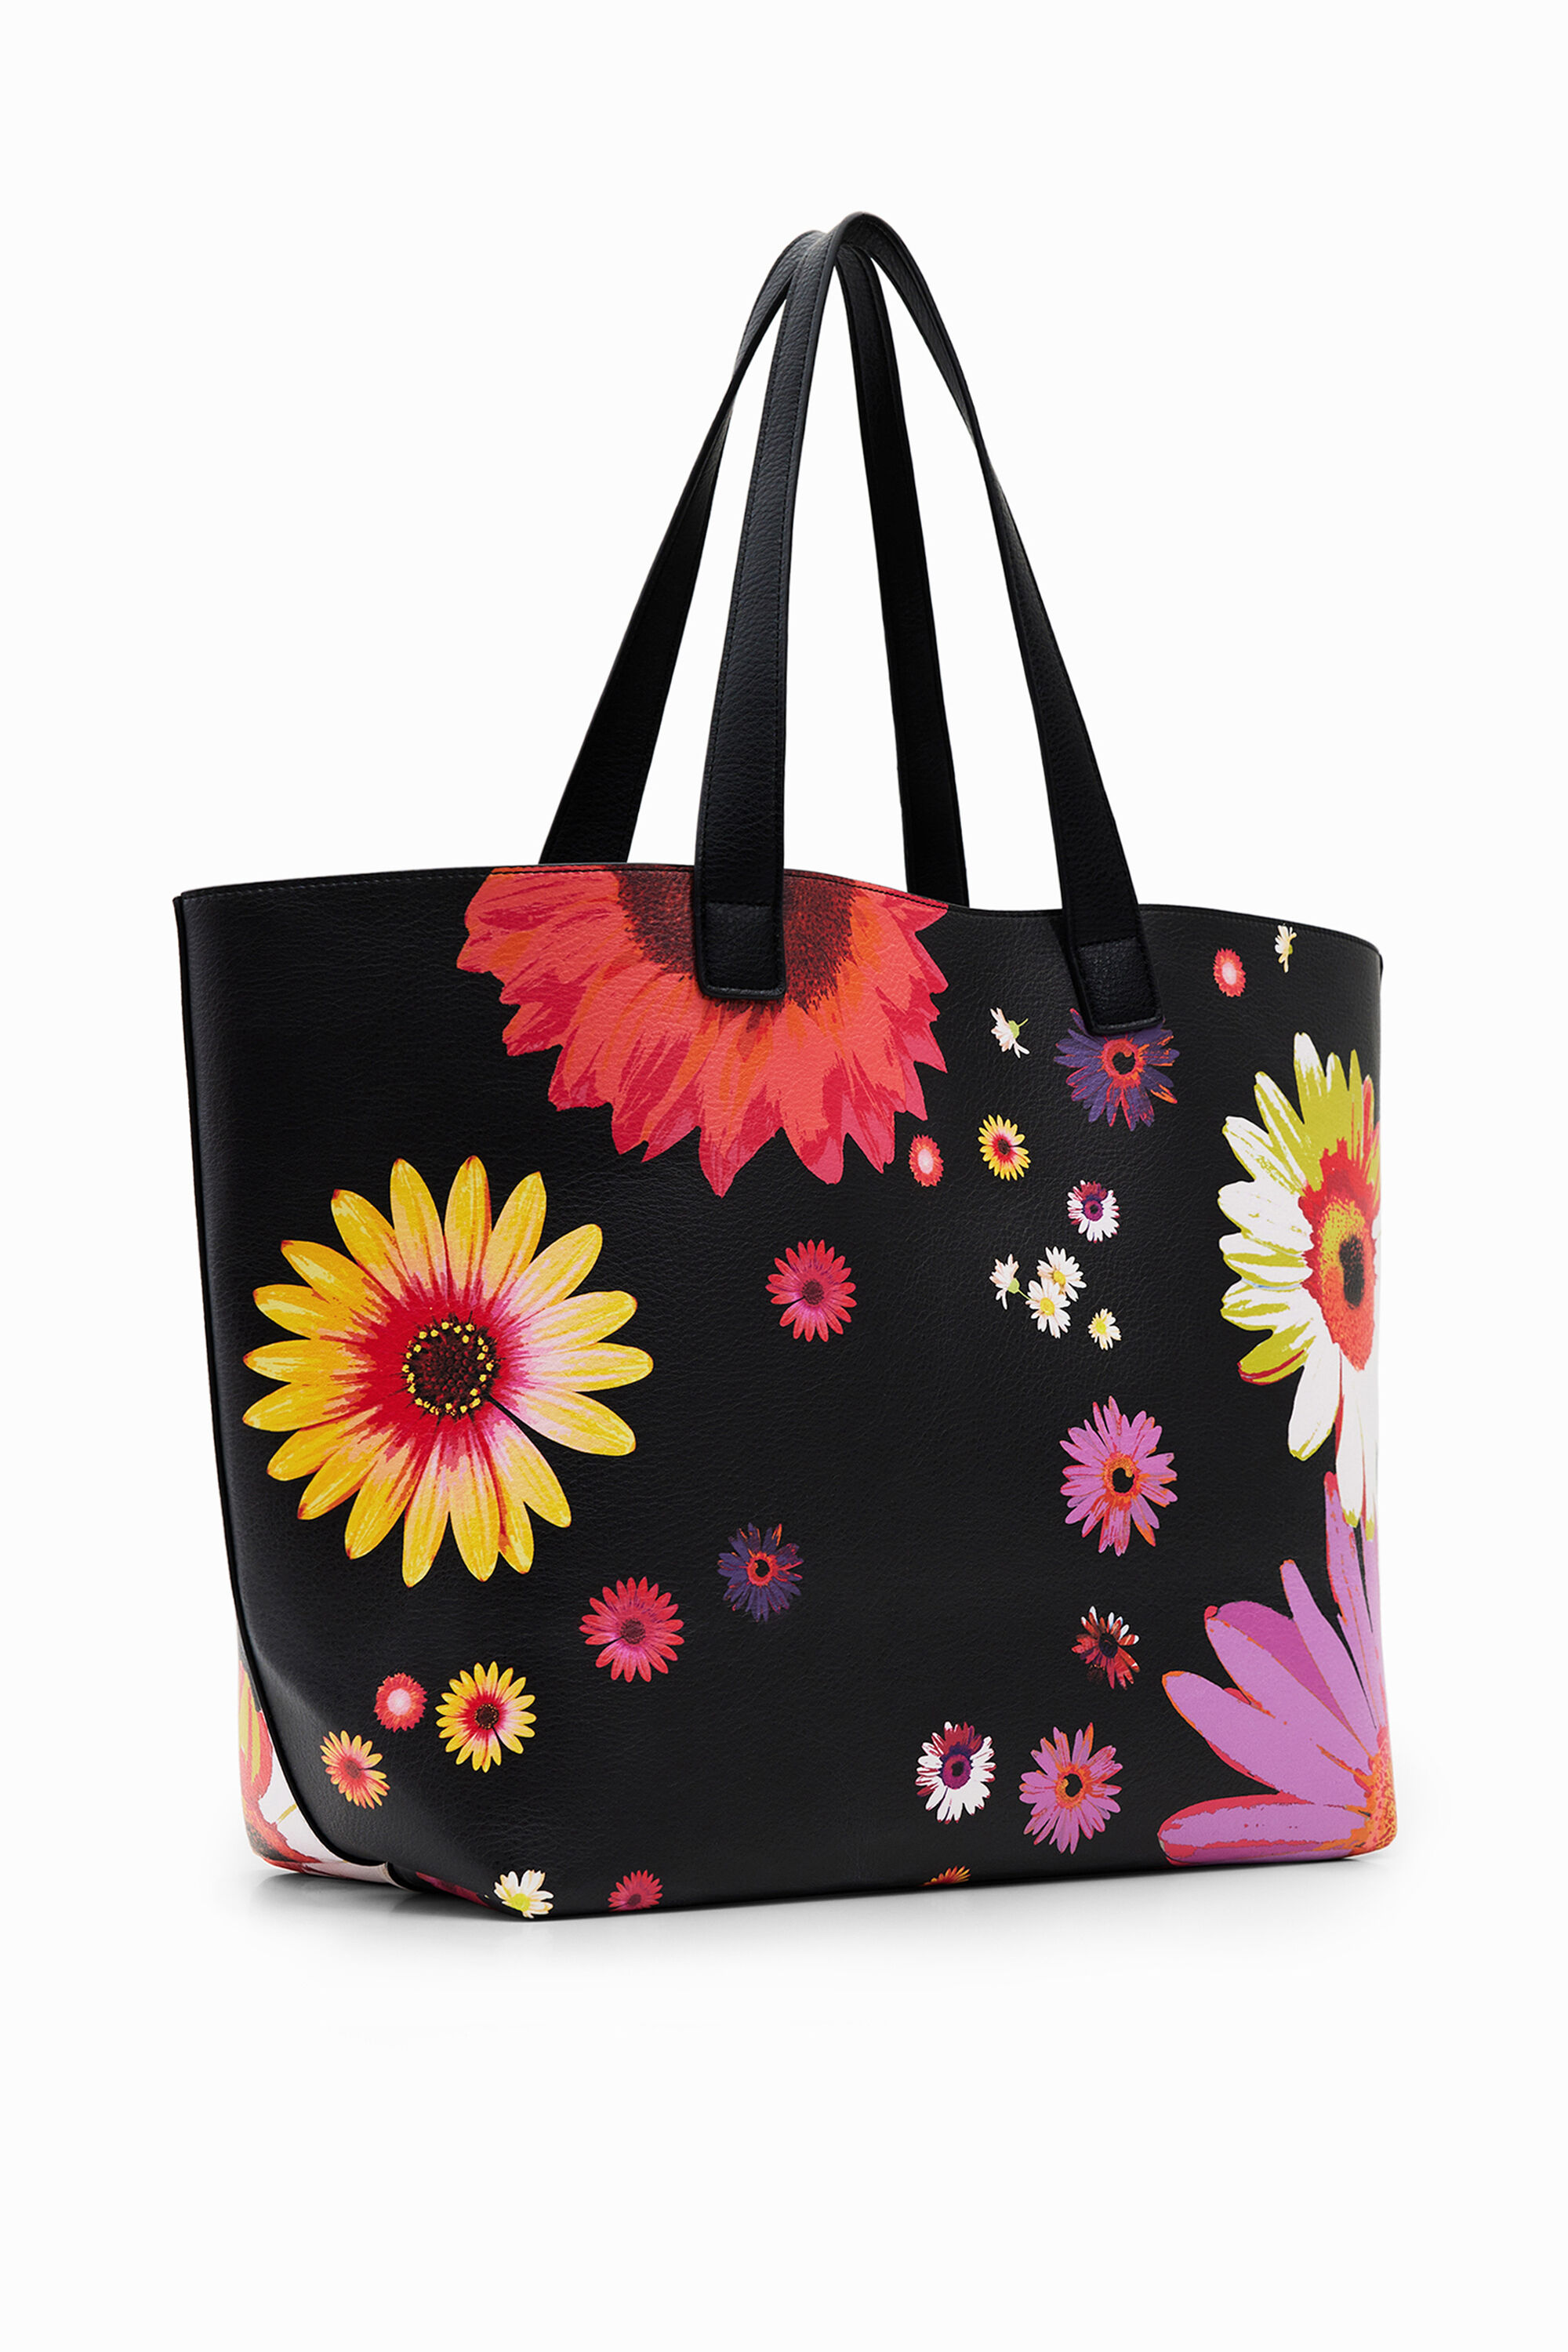 Women's Bags and backpacks | Desigual